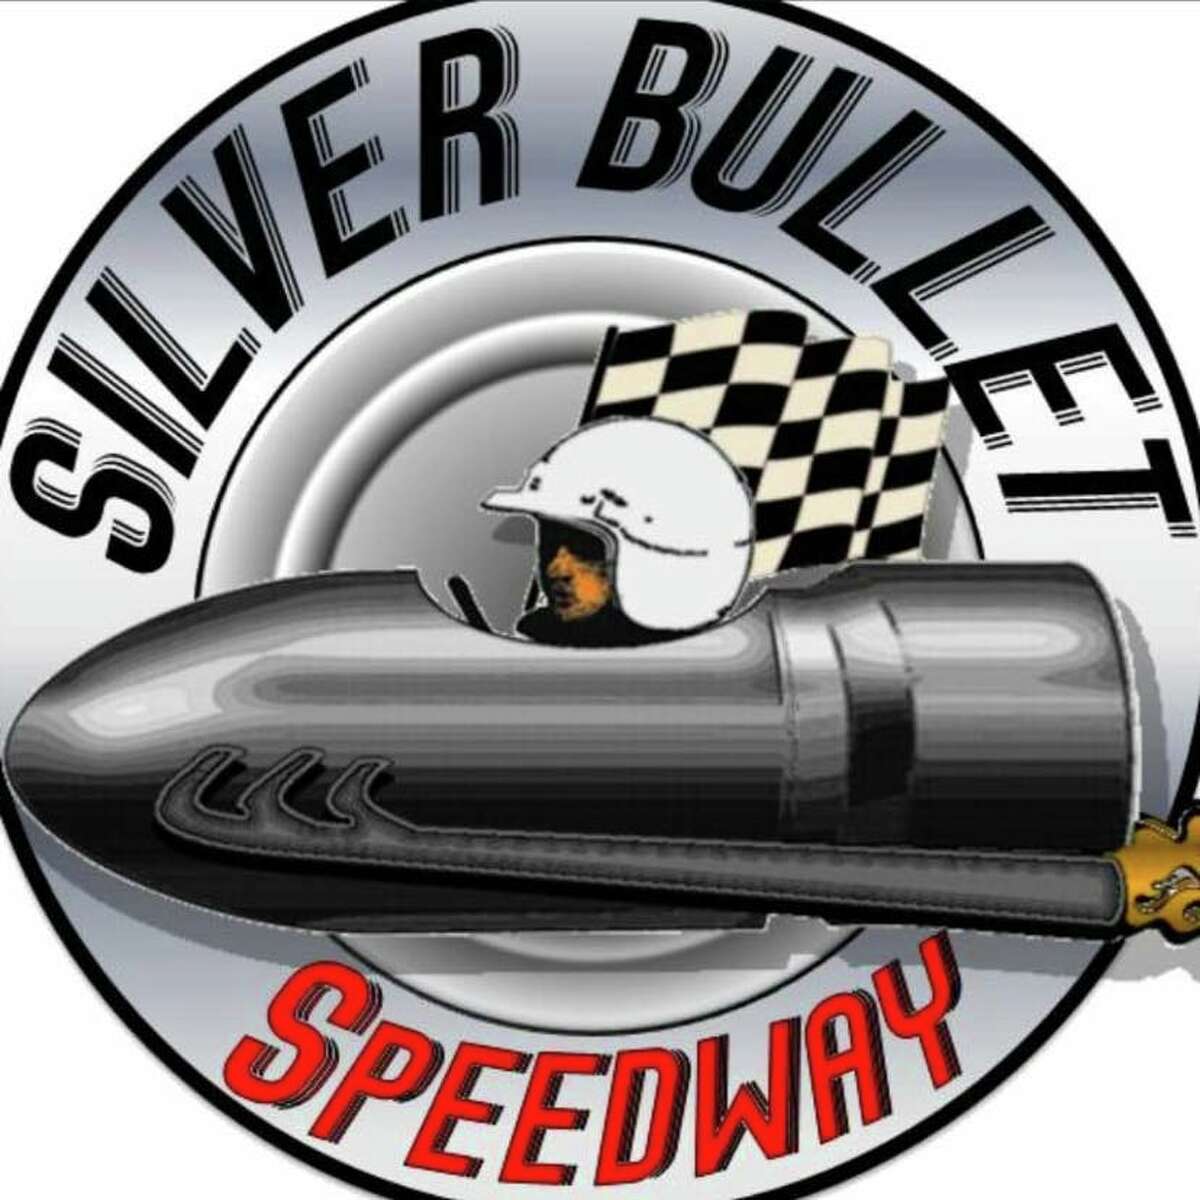 The Silver Bullet Speeday looks to open up April 30.